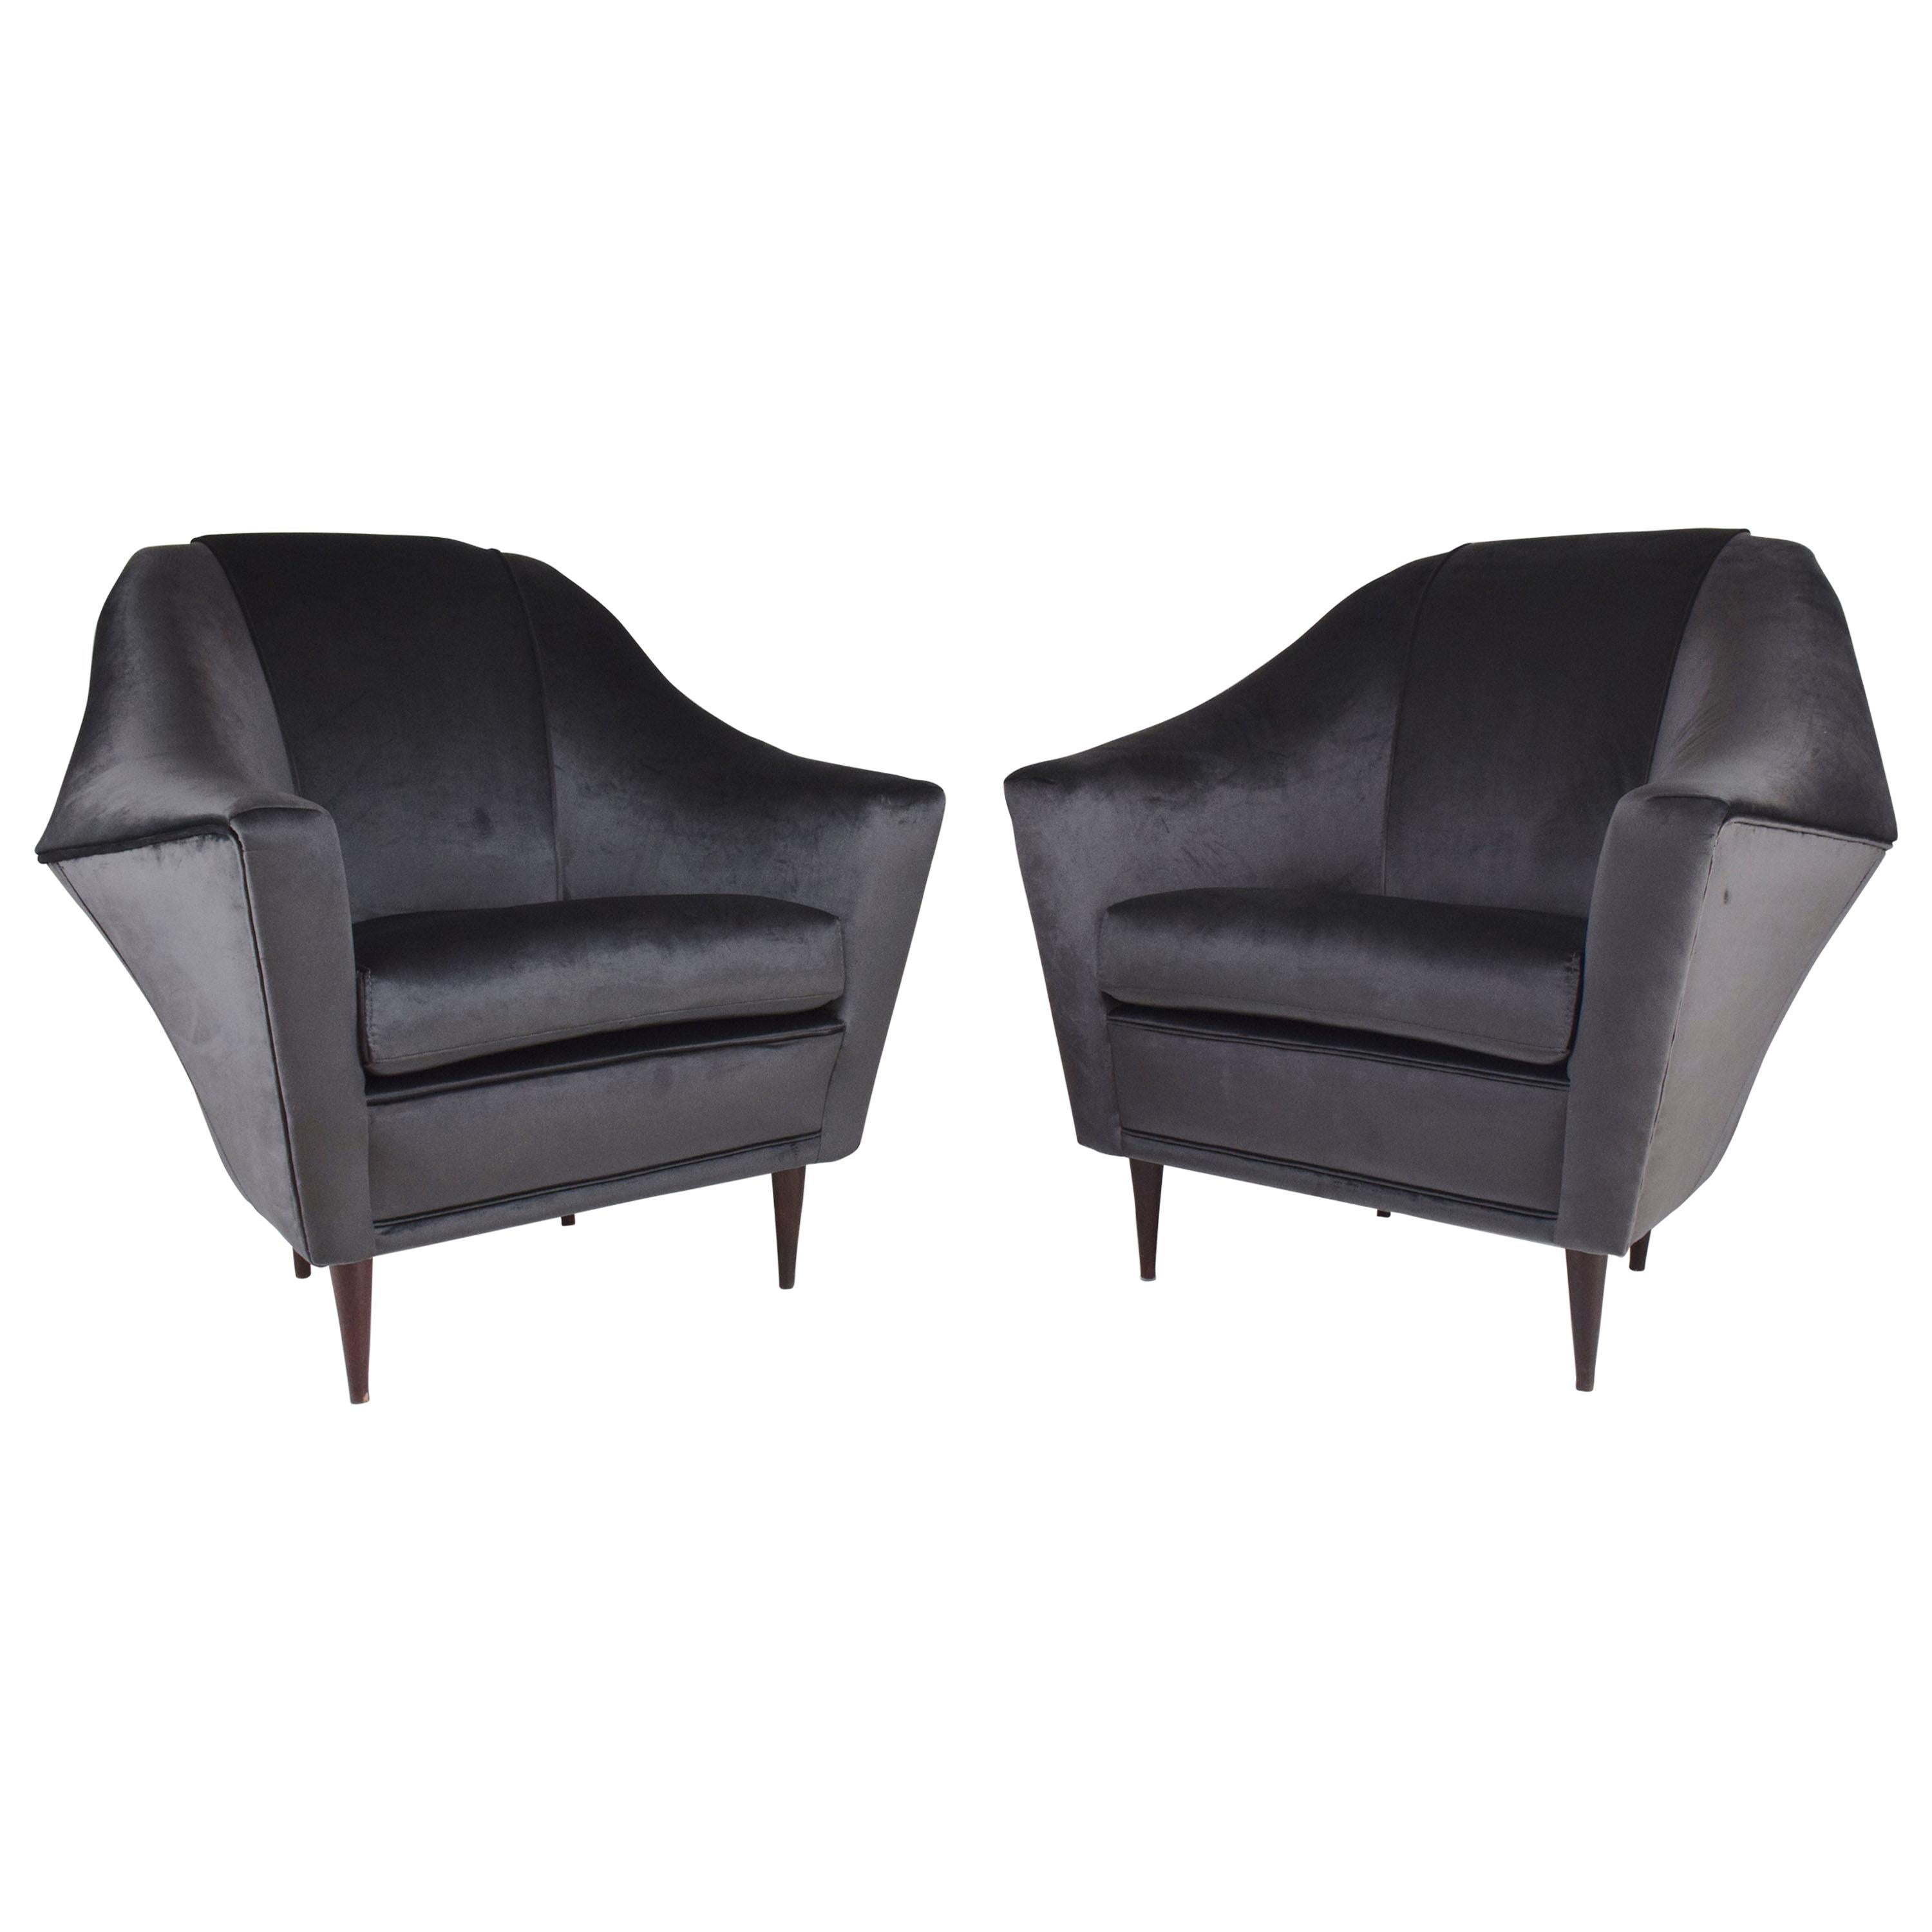 20th Century Ico Parisi Armchairs for Ariberto Colombo, Set of Two, 1950s